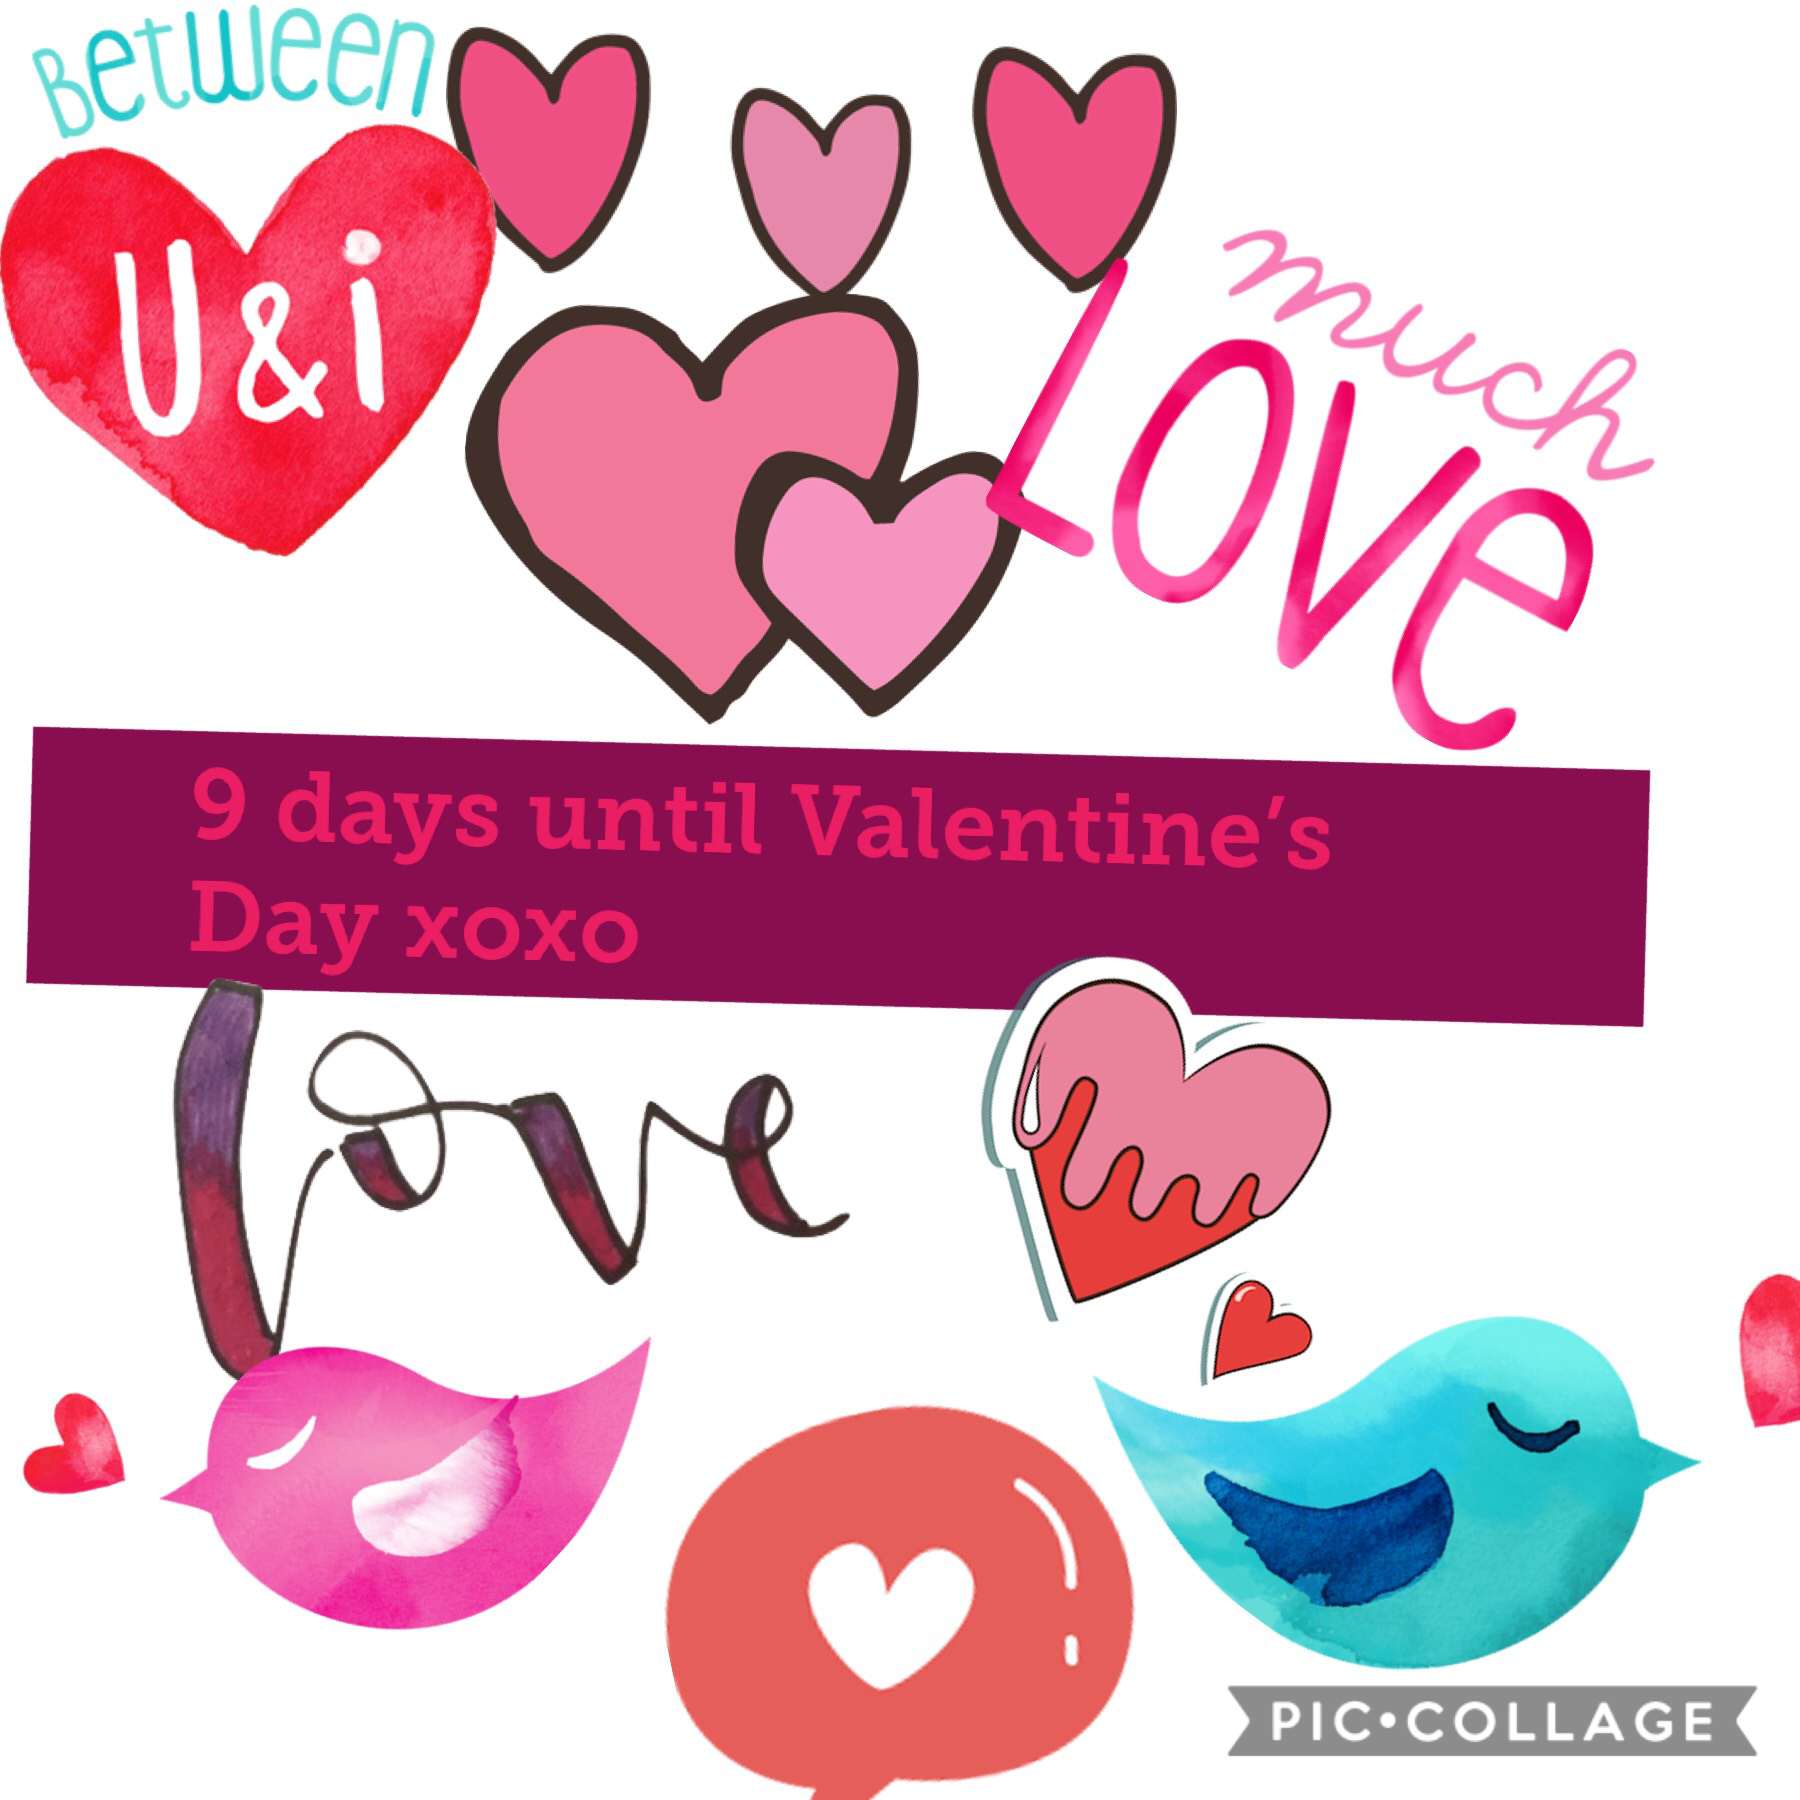 9 days till Valentine’s Day comment who you are spending it with xoxo